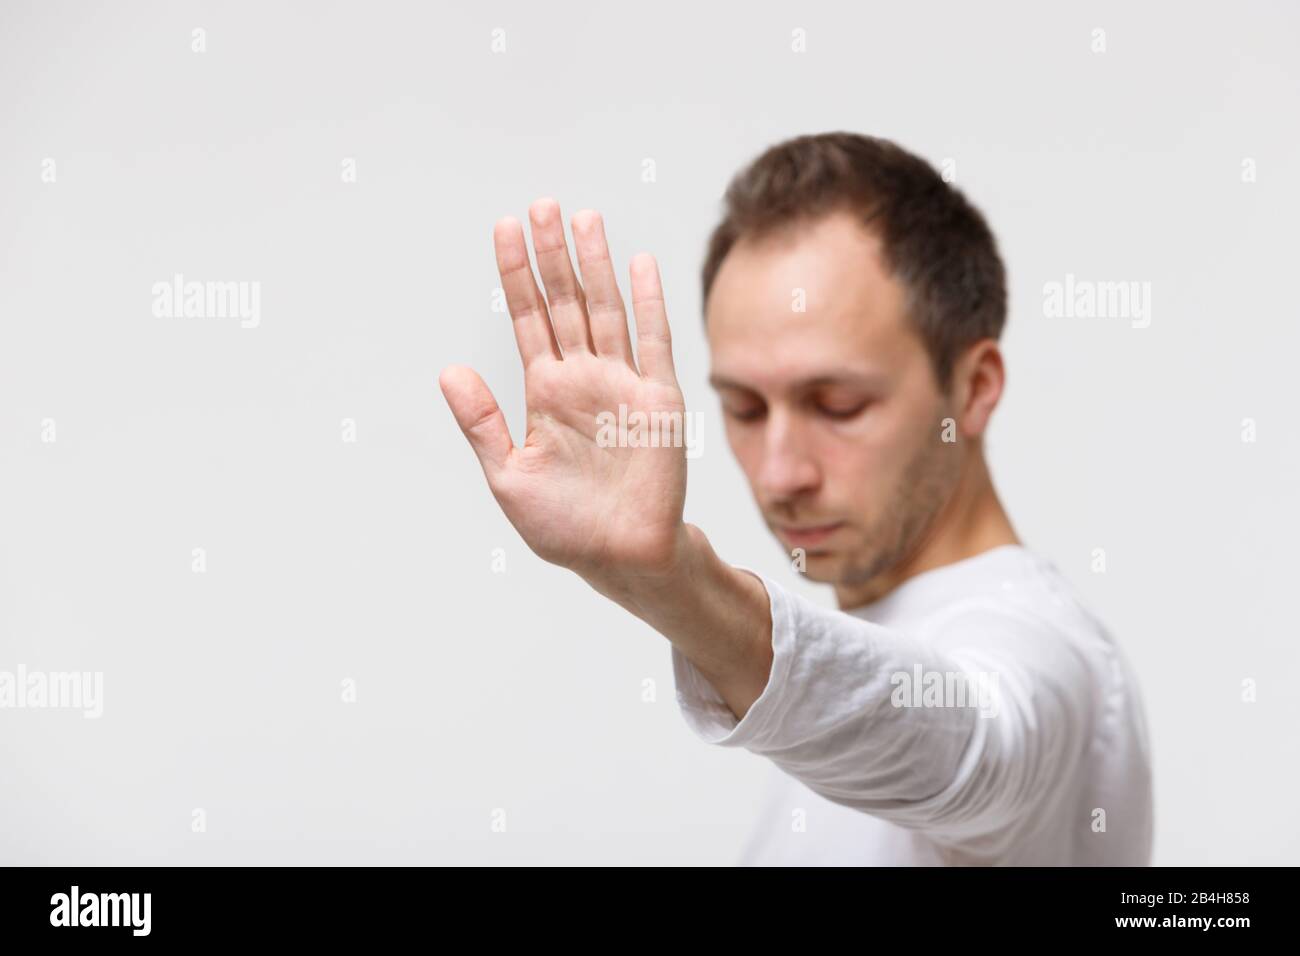 Close up of angry man refuses offer, showing a gesture of refusing junk food,  rejects something unpleasant, selective focus. Negative emotion, hand g Stock Photo